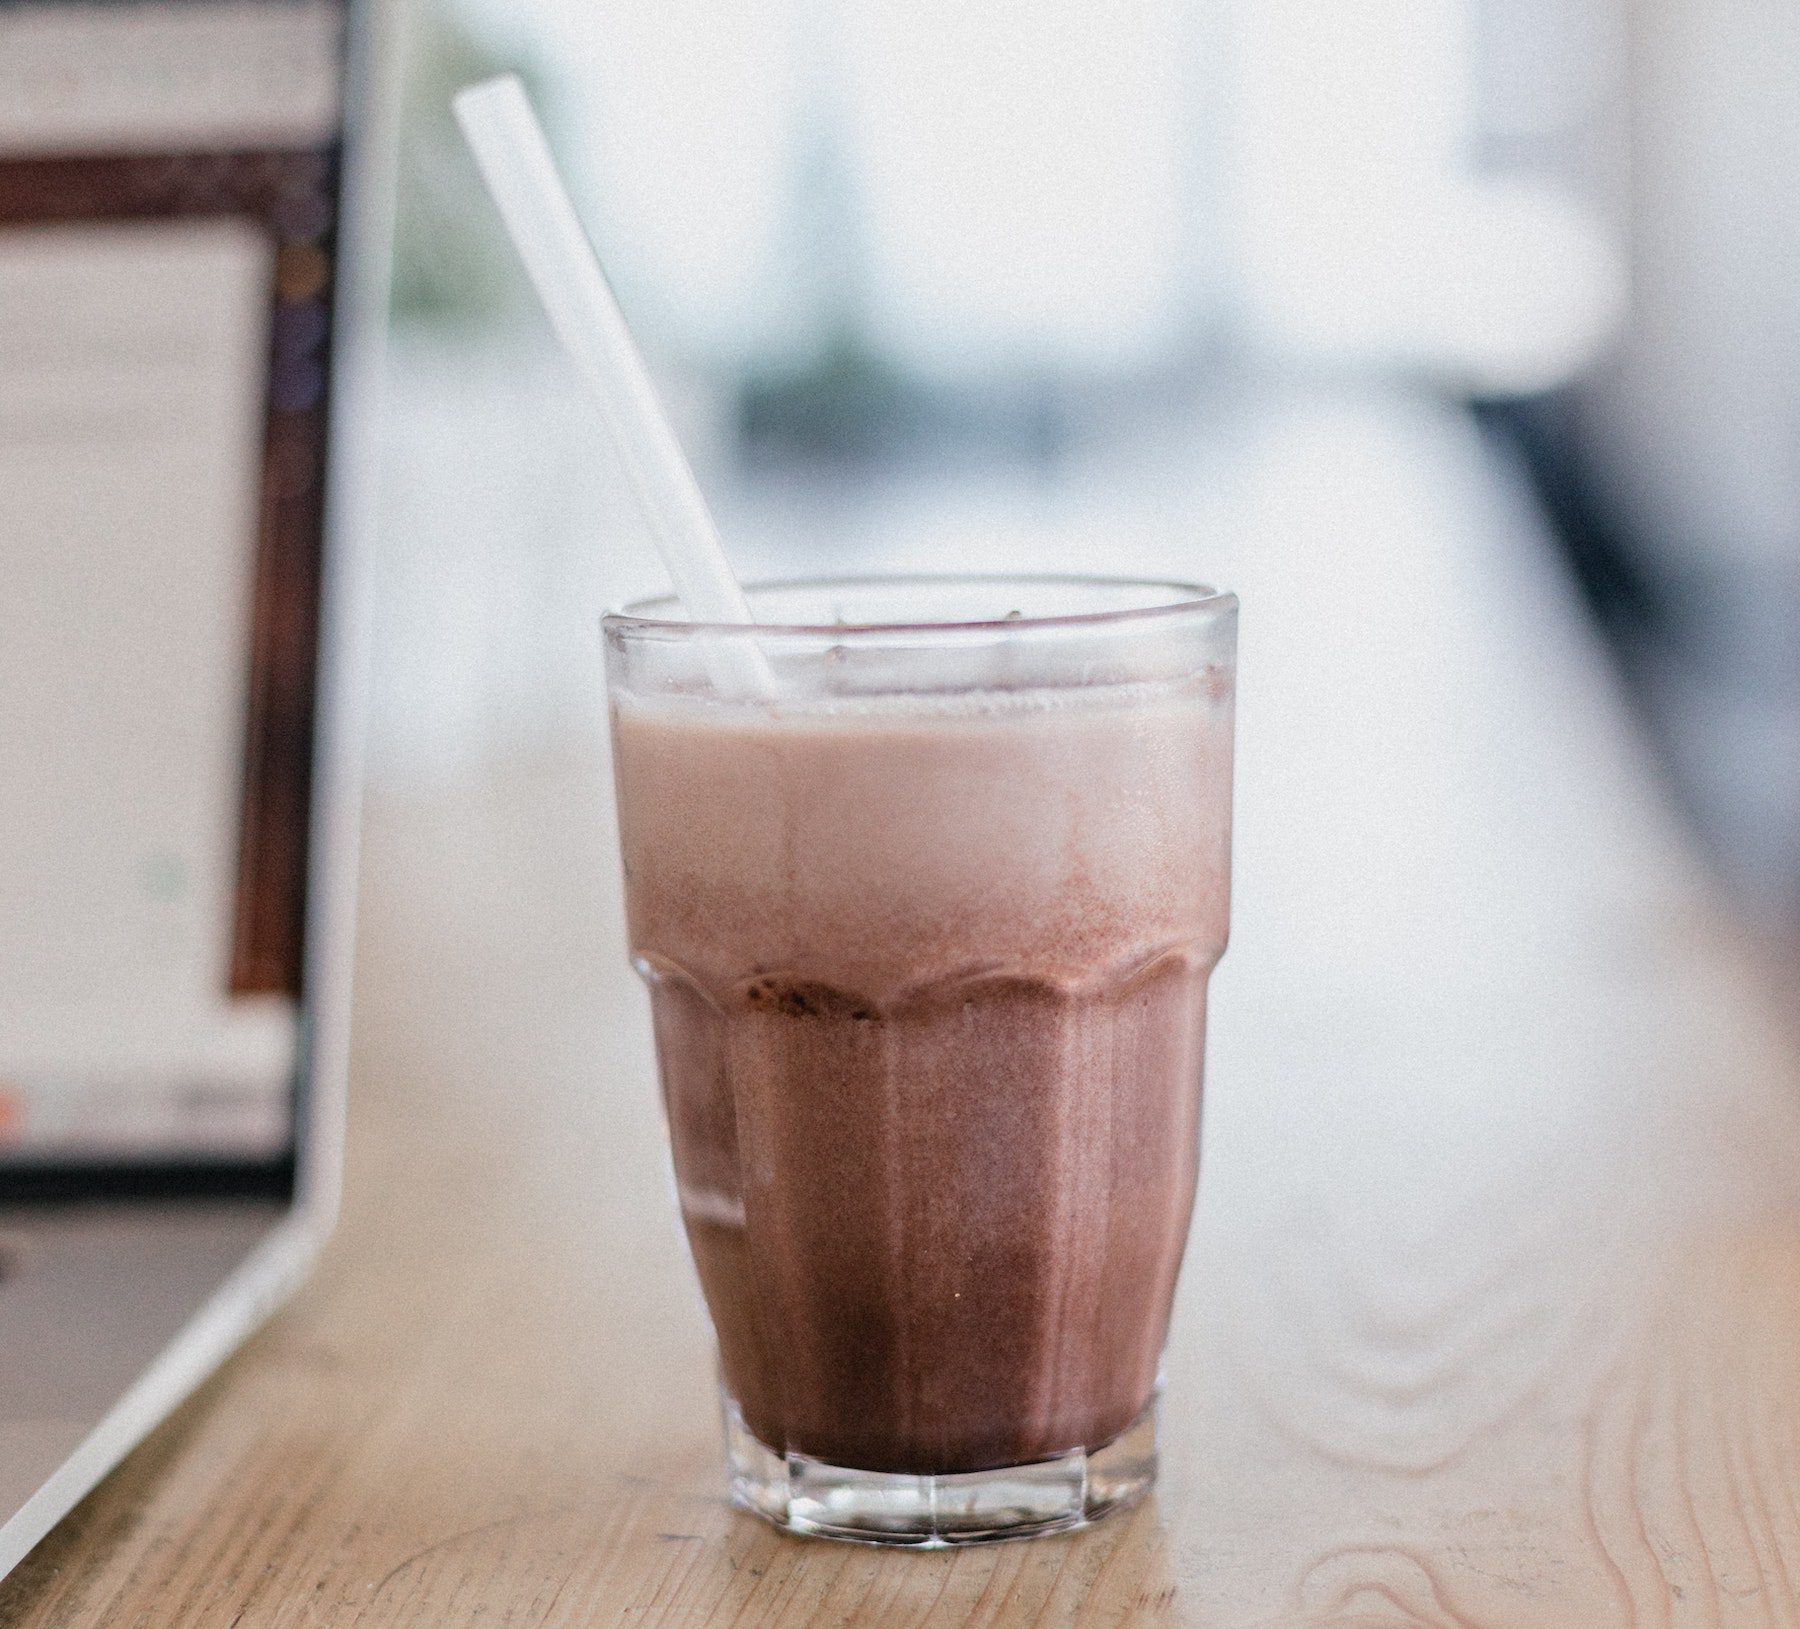 A mocha espresso smoothie in a clear glass with background blurred.